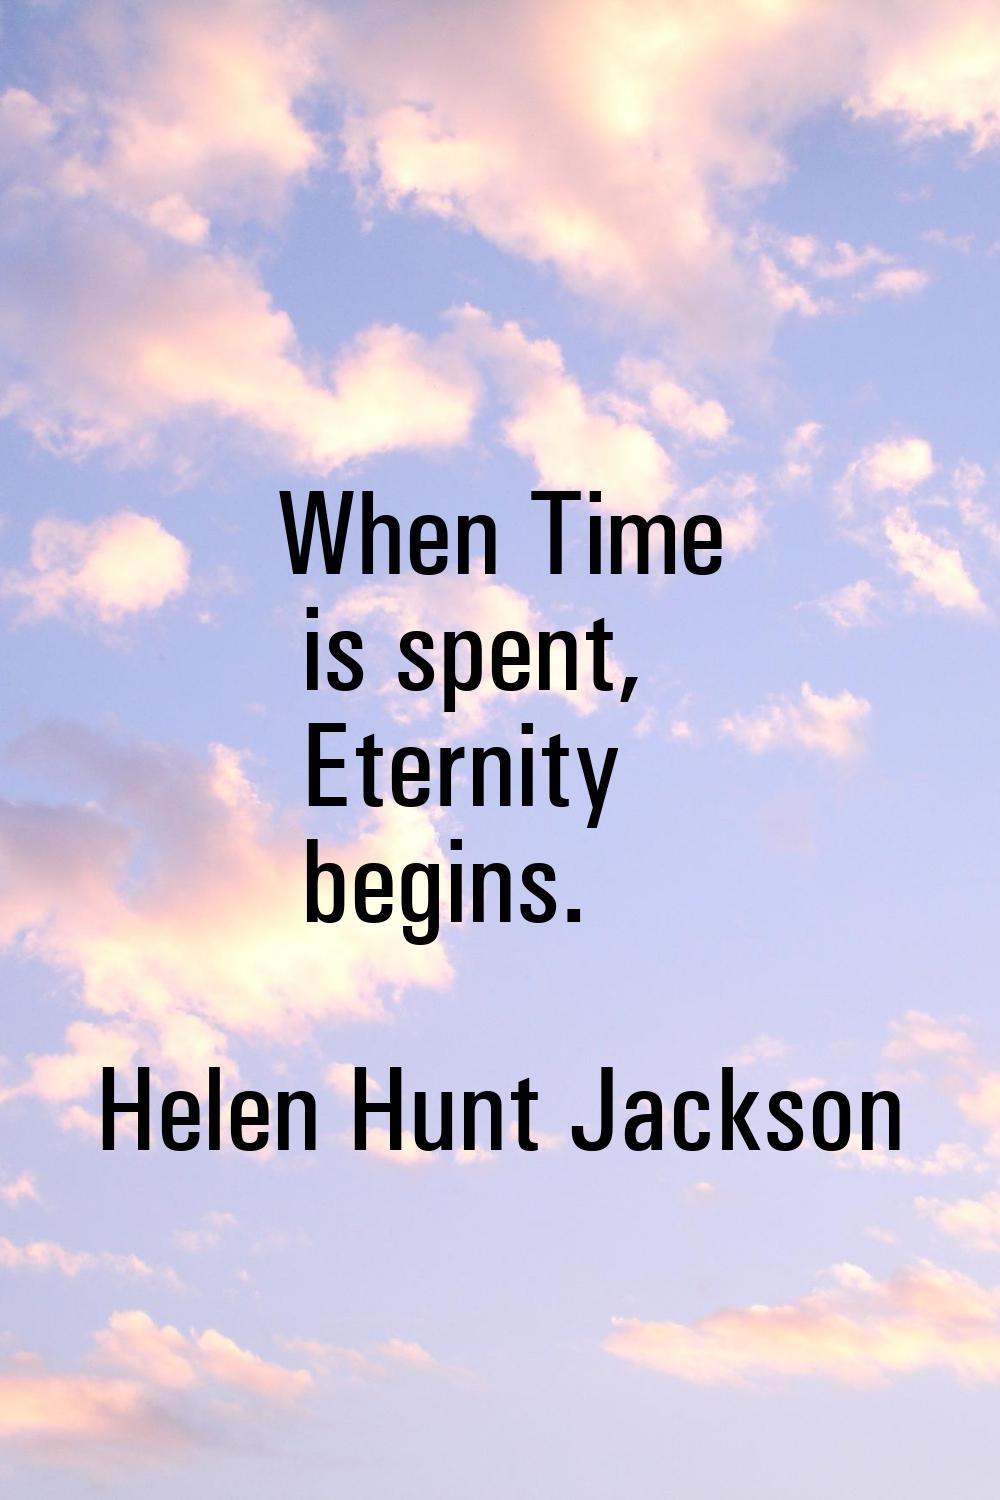 When Time is spent, Eternity begins.